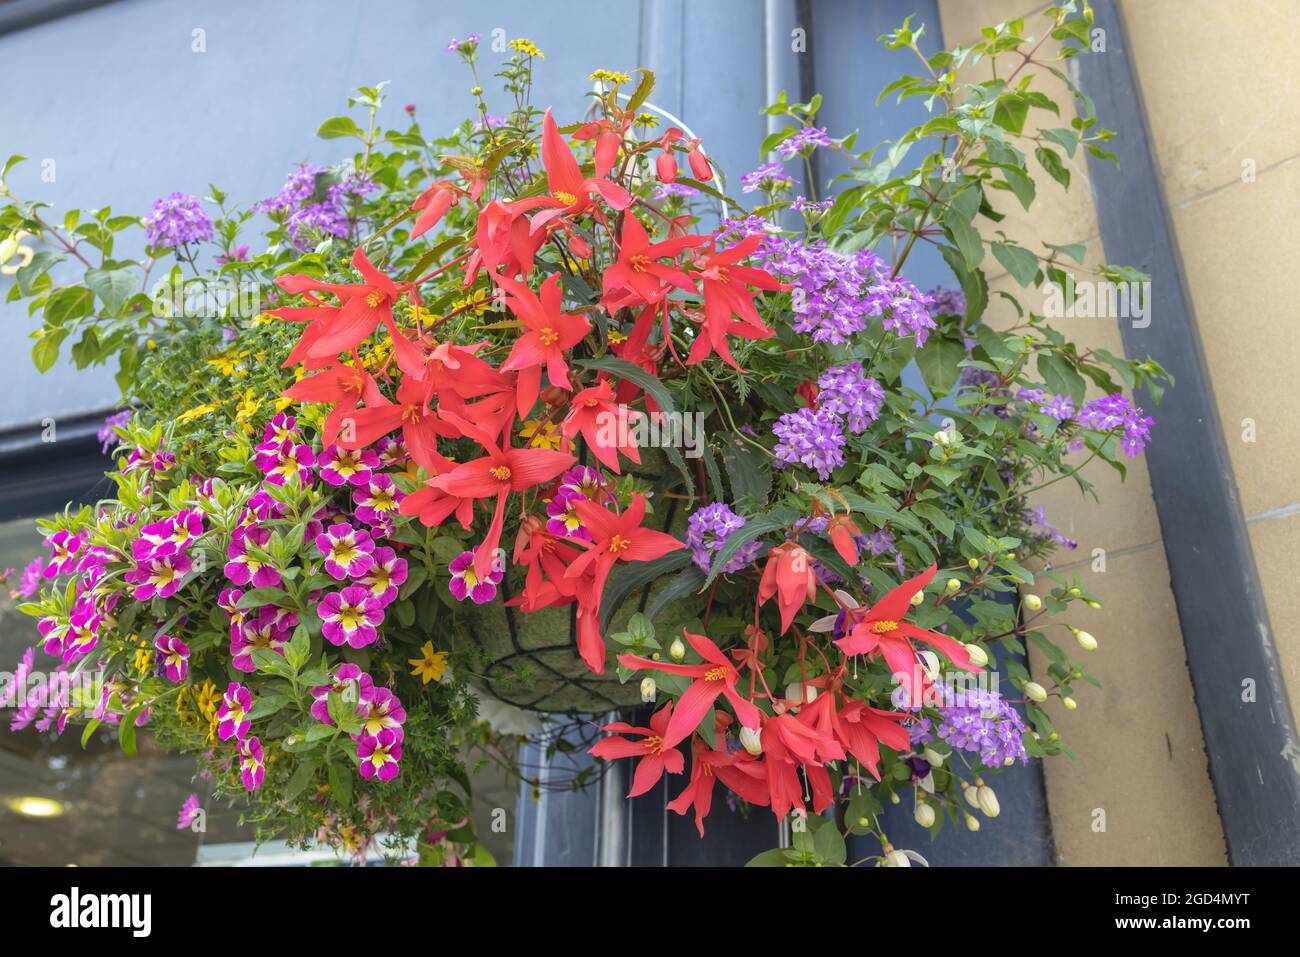 Mixed red, purple, orange and pink flowers eye-catching outdoors hanging flower basket. Stock Photo